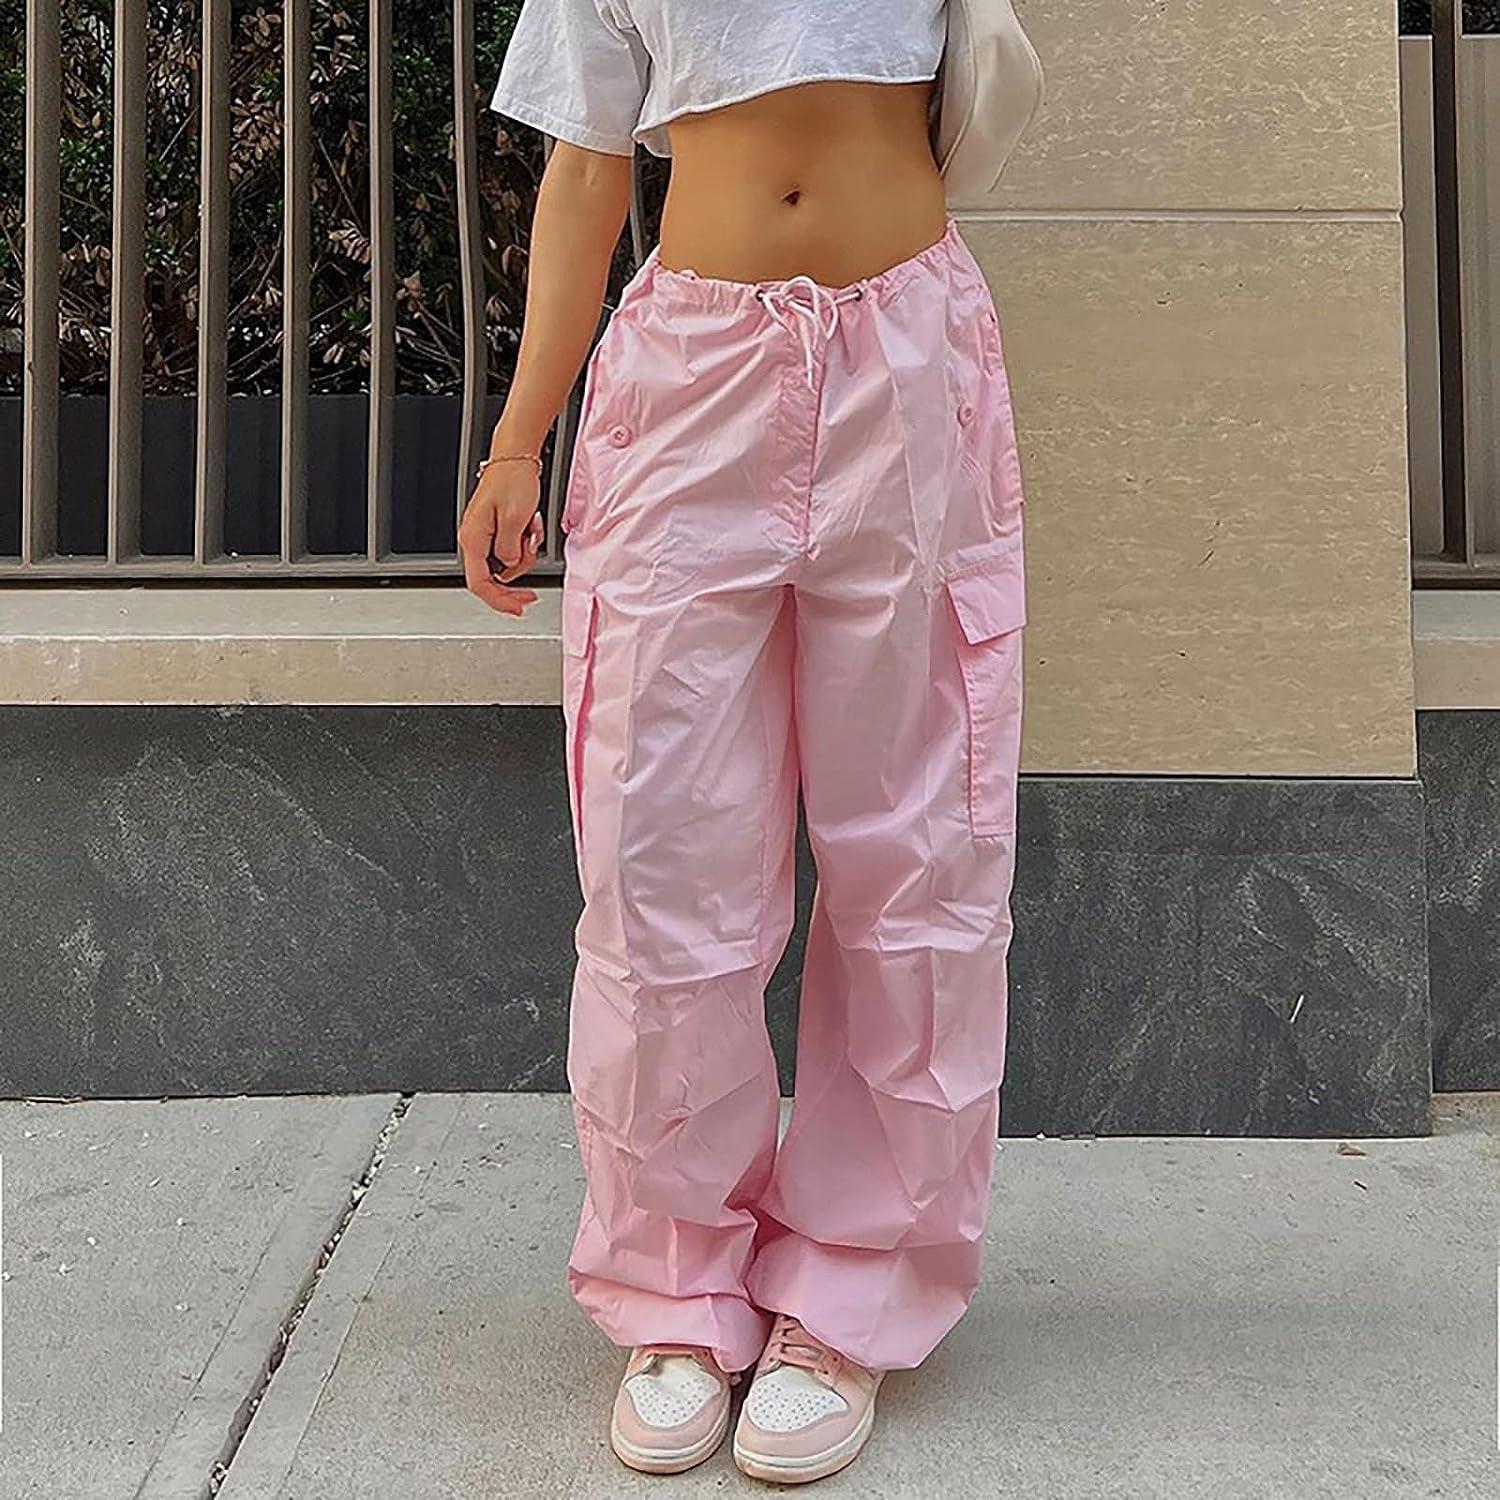 Gufesf Womens Parachute Pants Drawstring Elastic Low Waist Sweatpants Loose  Baggy Y2K Cargo Pants Trousers with Pockets Ak-c-pink X-Large